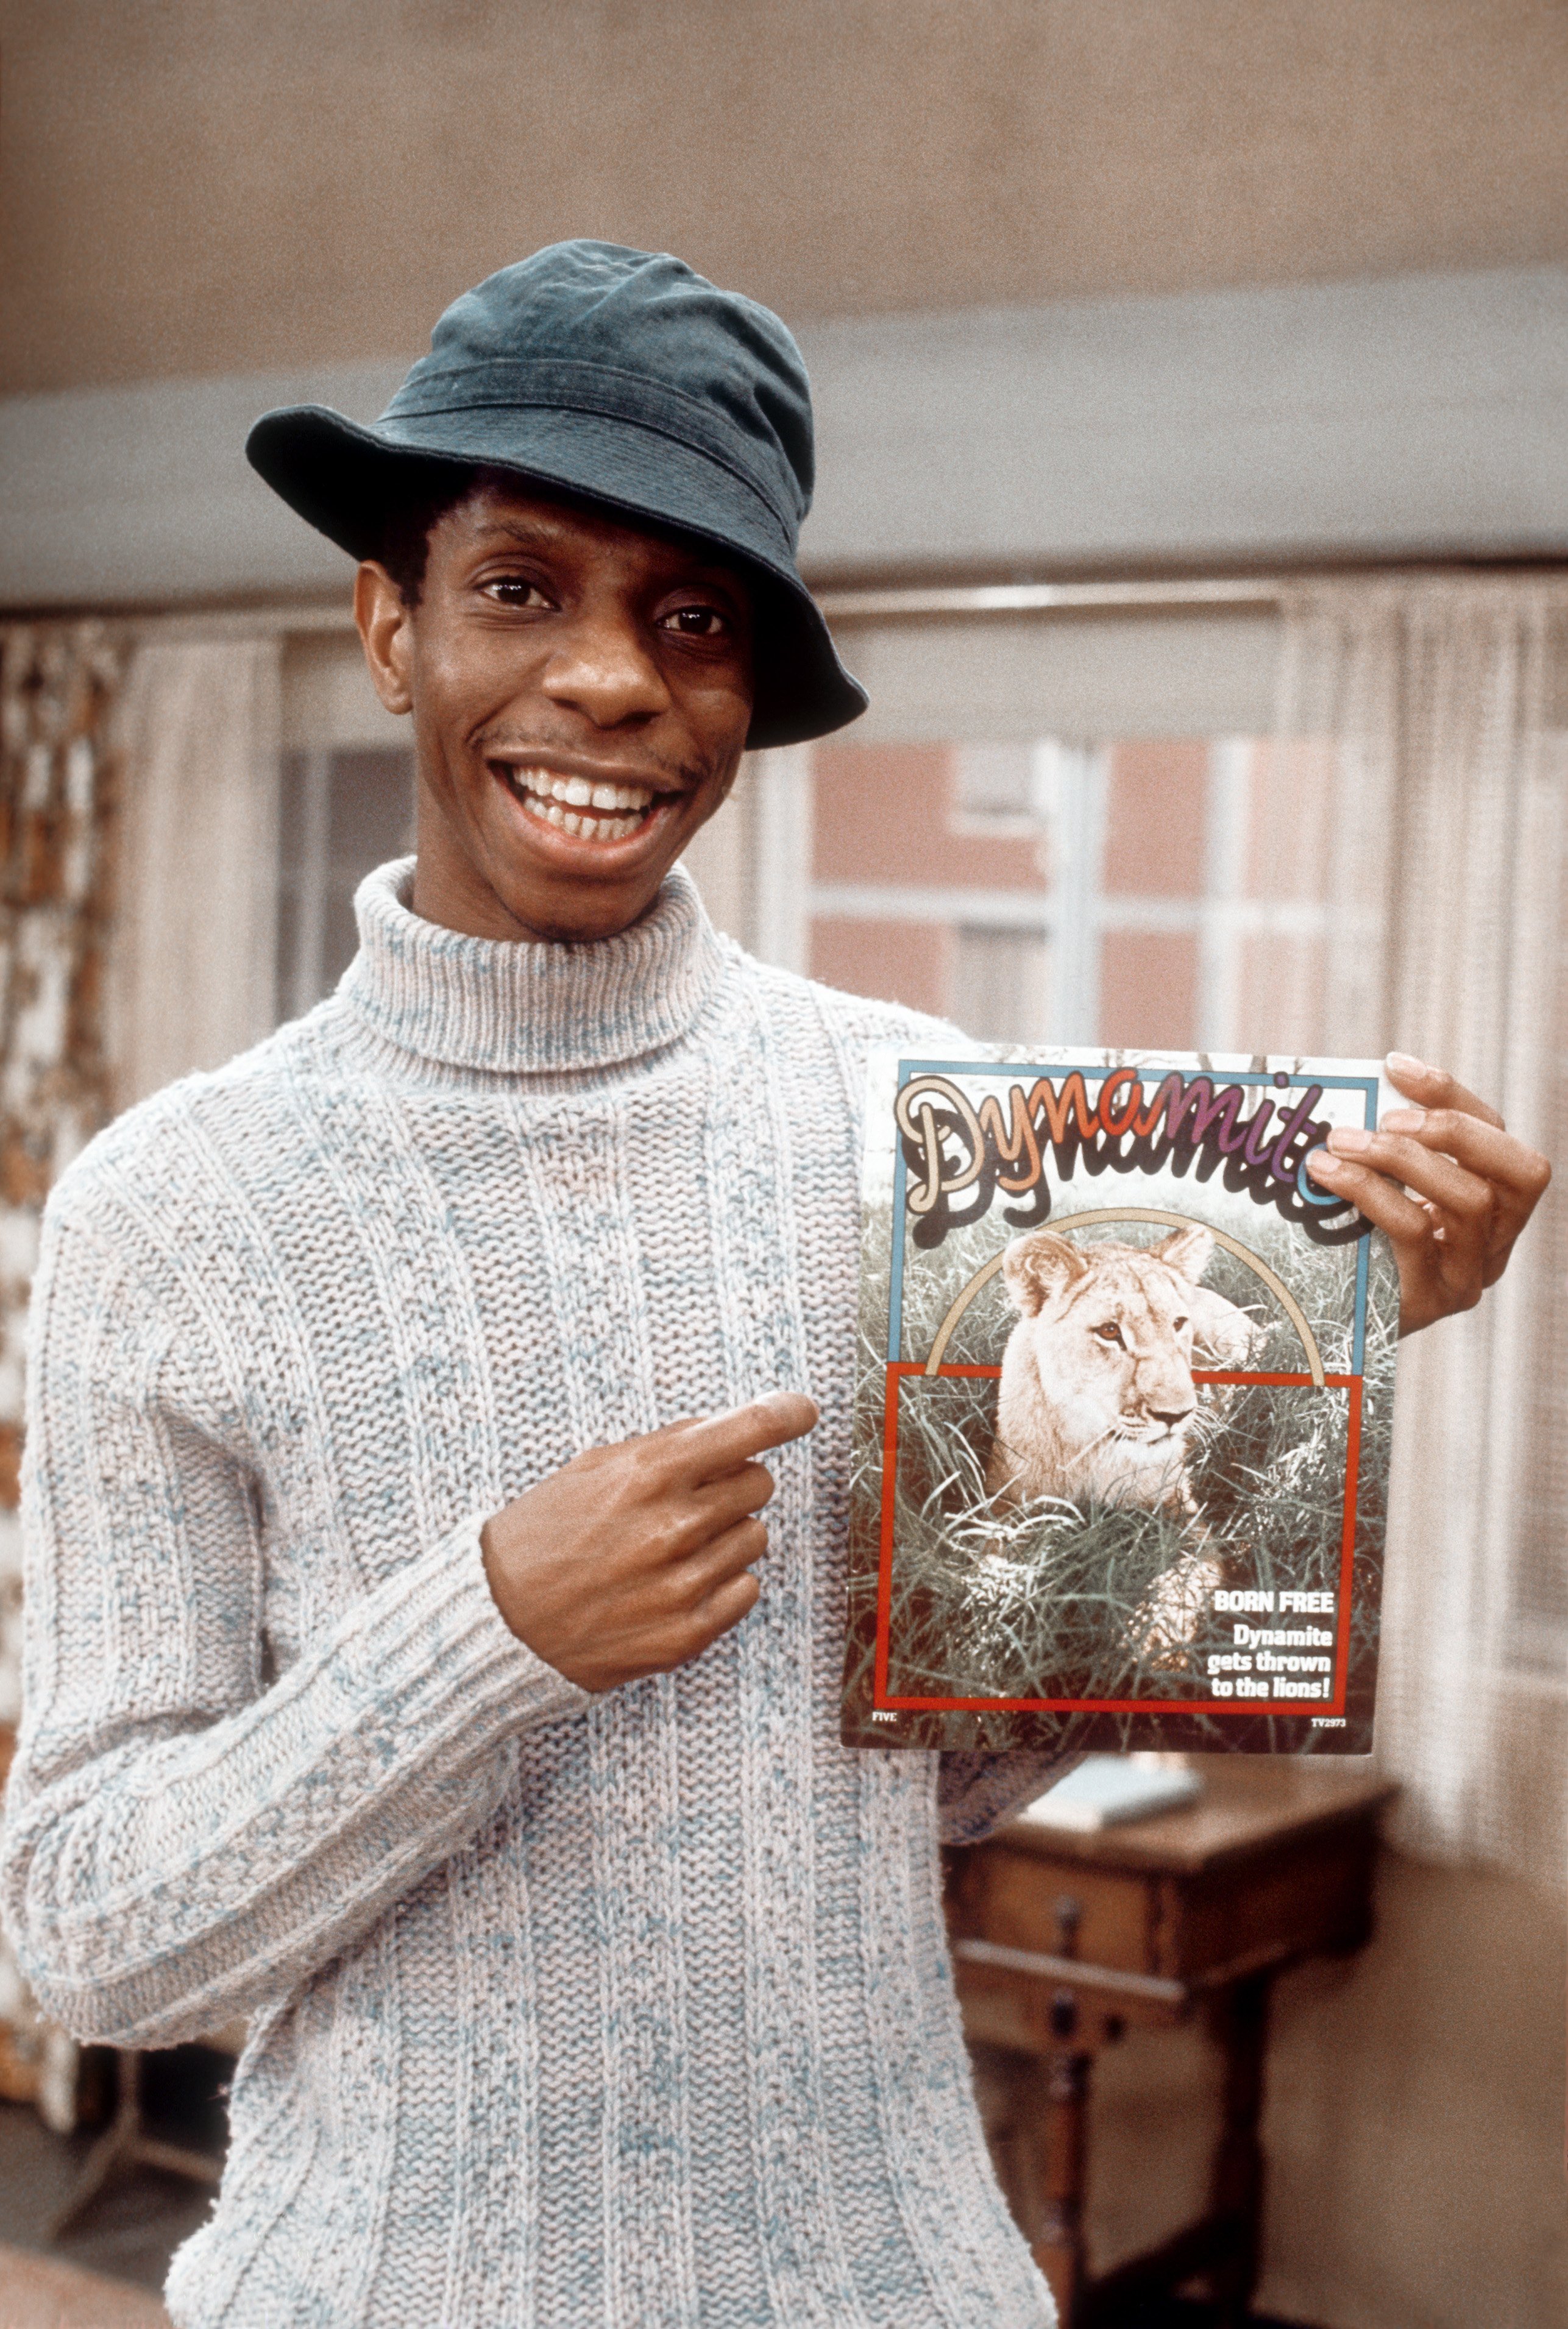 Actor Jimmie Walker of 'Good Times' poses for a portrait with his trademark floppy hat, 1975